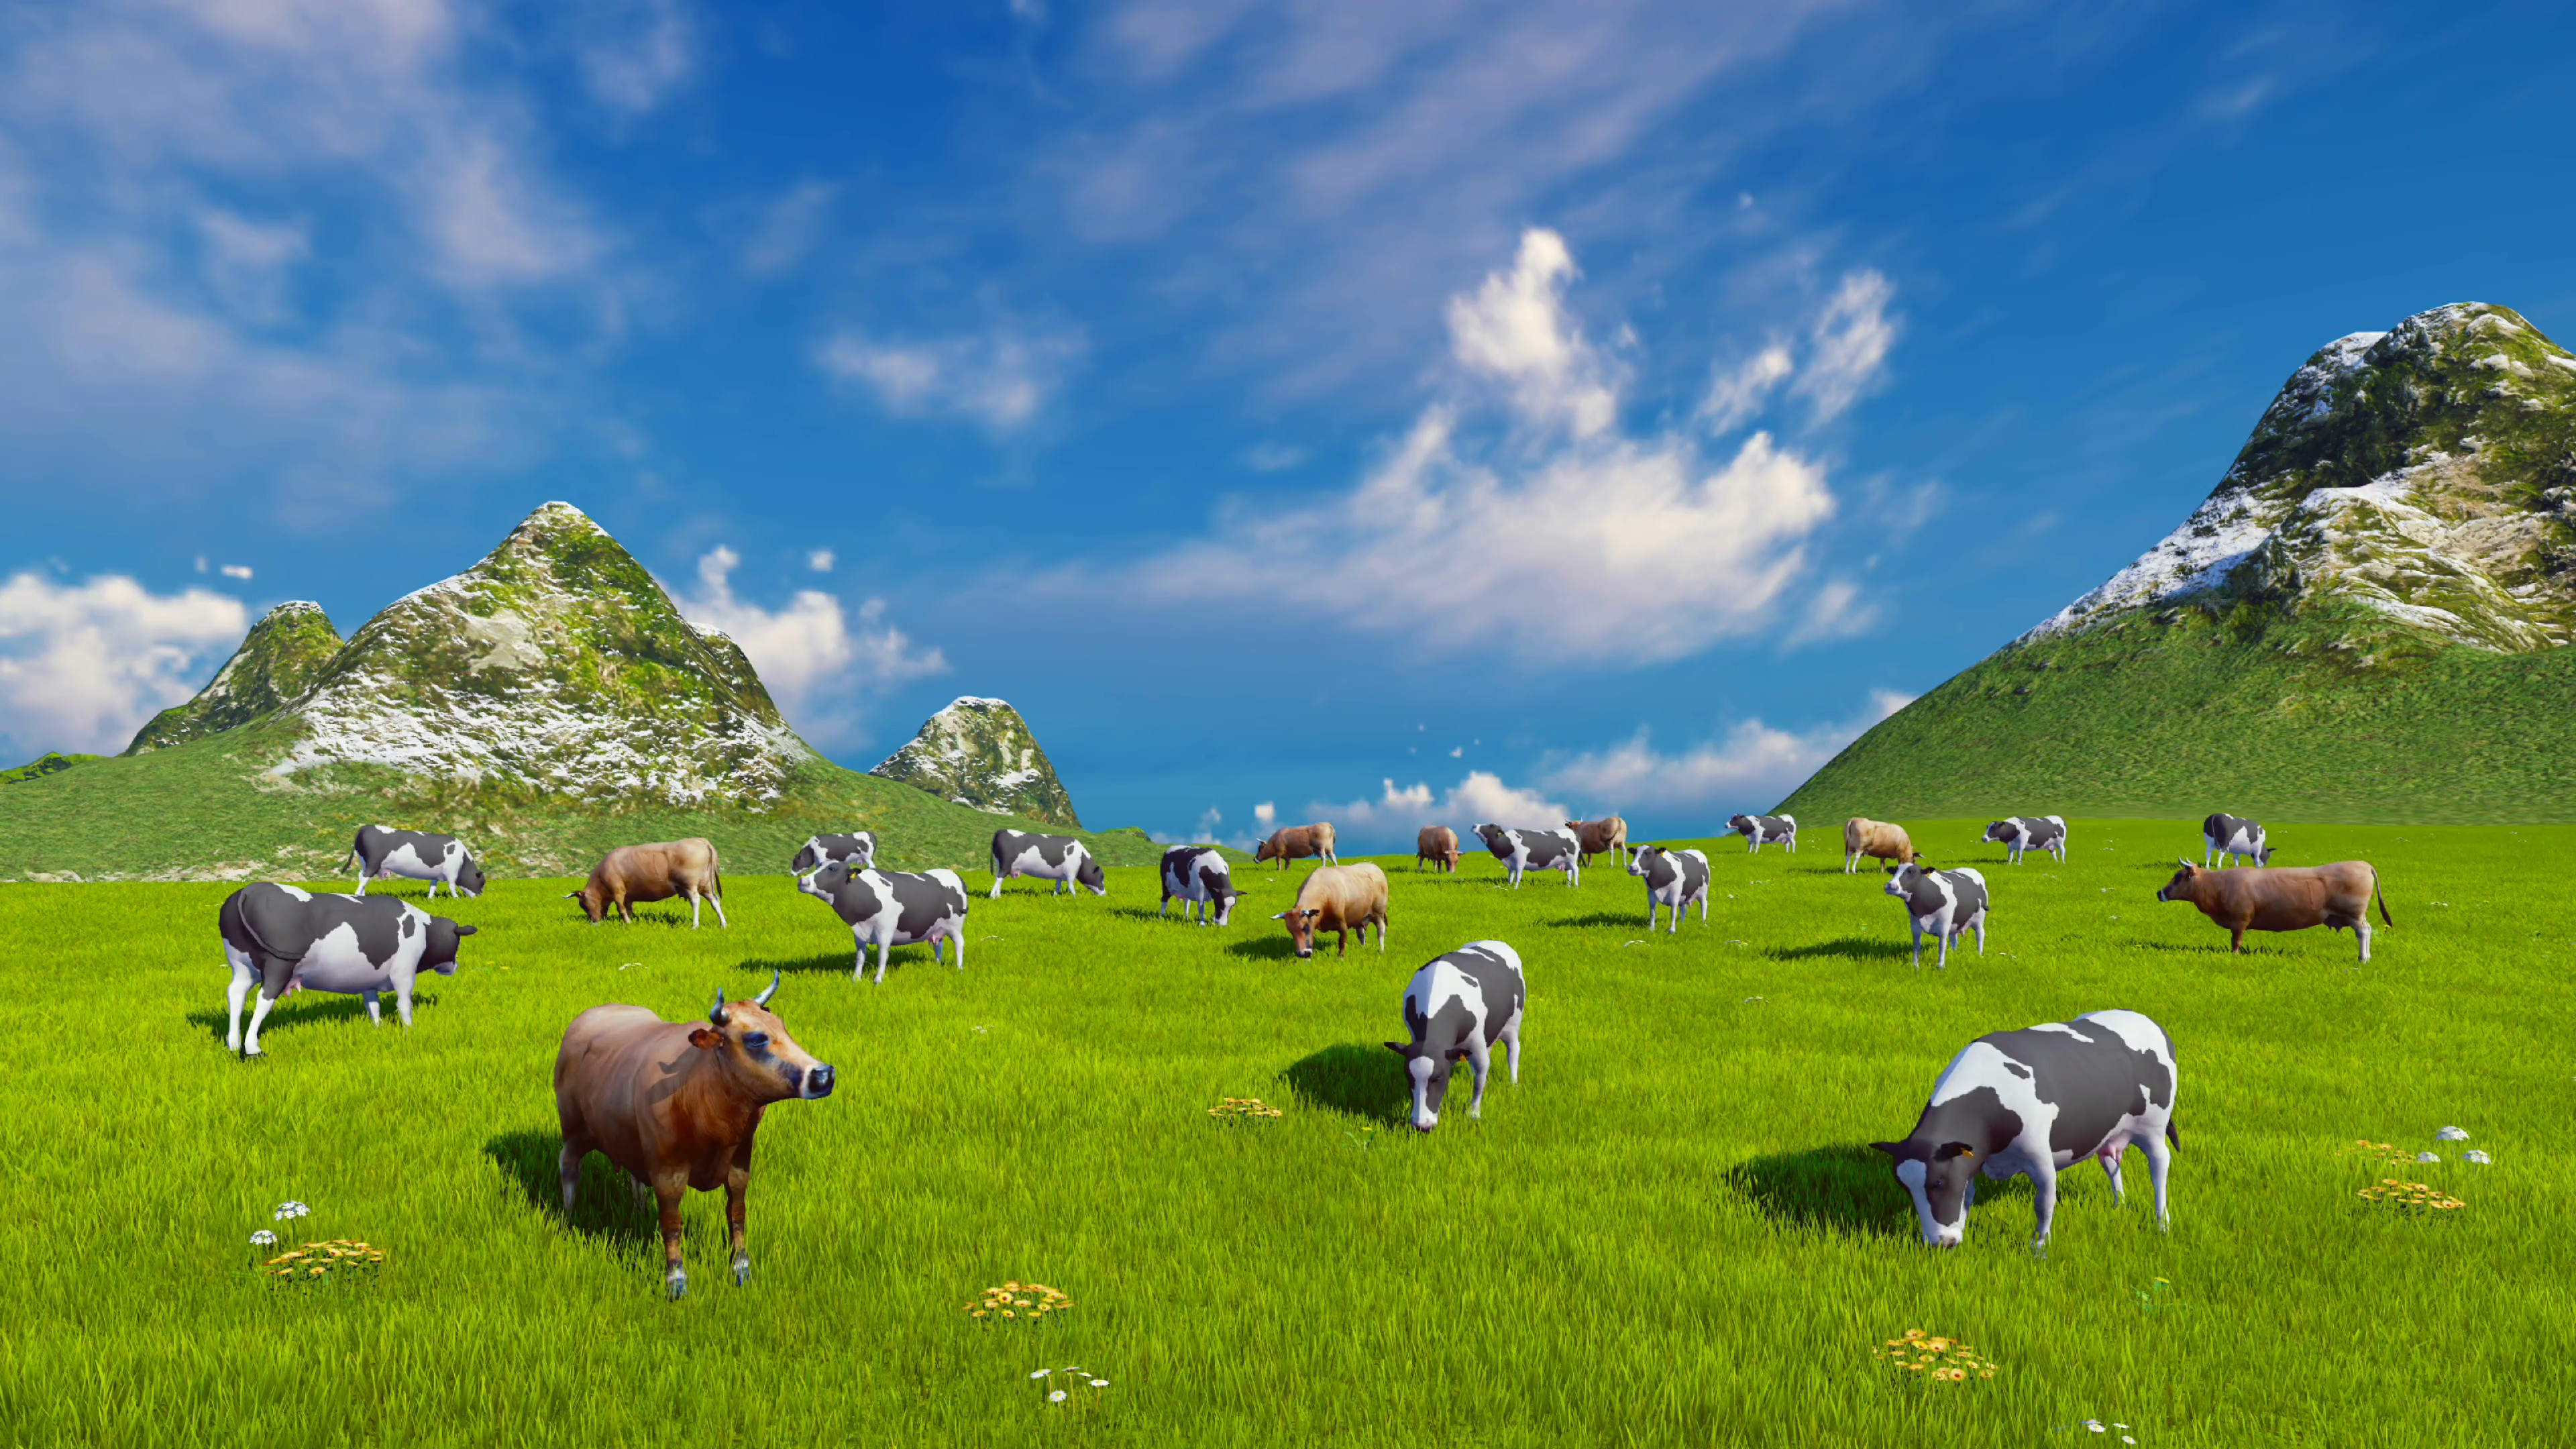 3840x2160 Farm landscape with a herd of mottled dairy cows grazing on a verdant  alpine pasture at